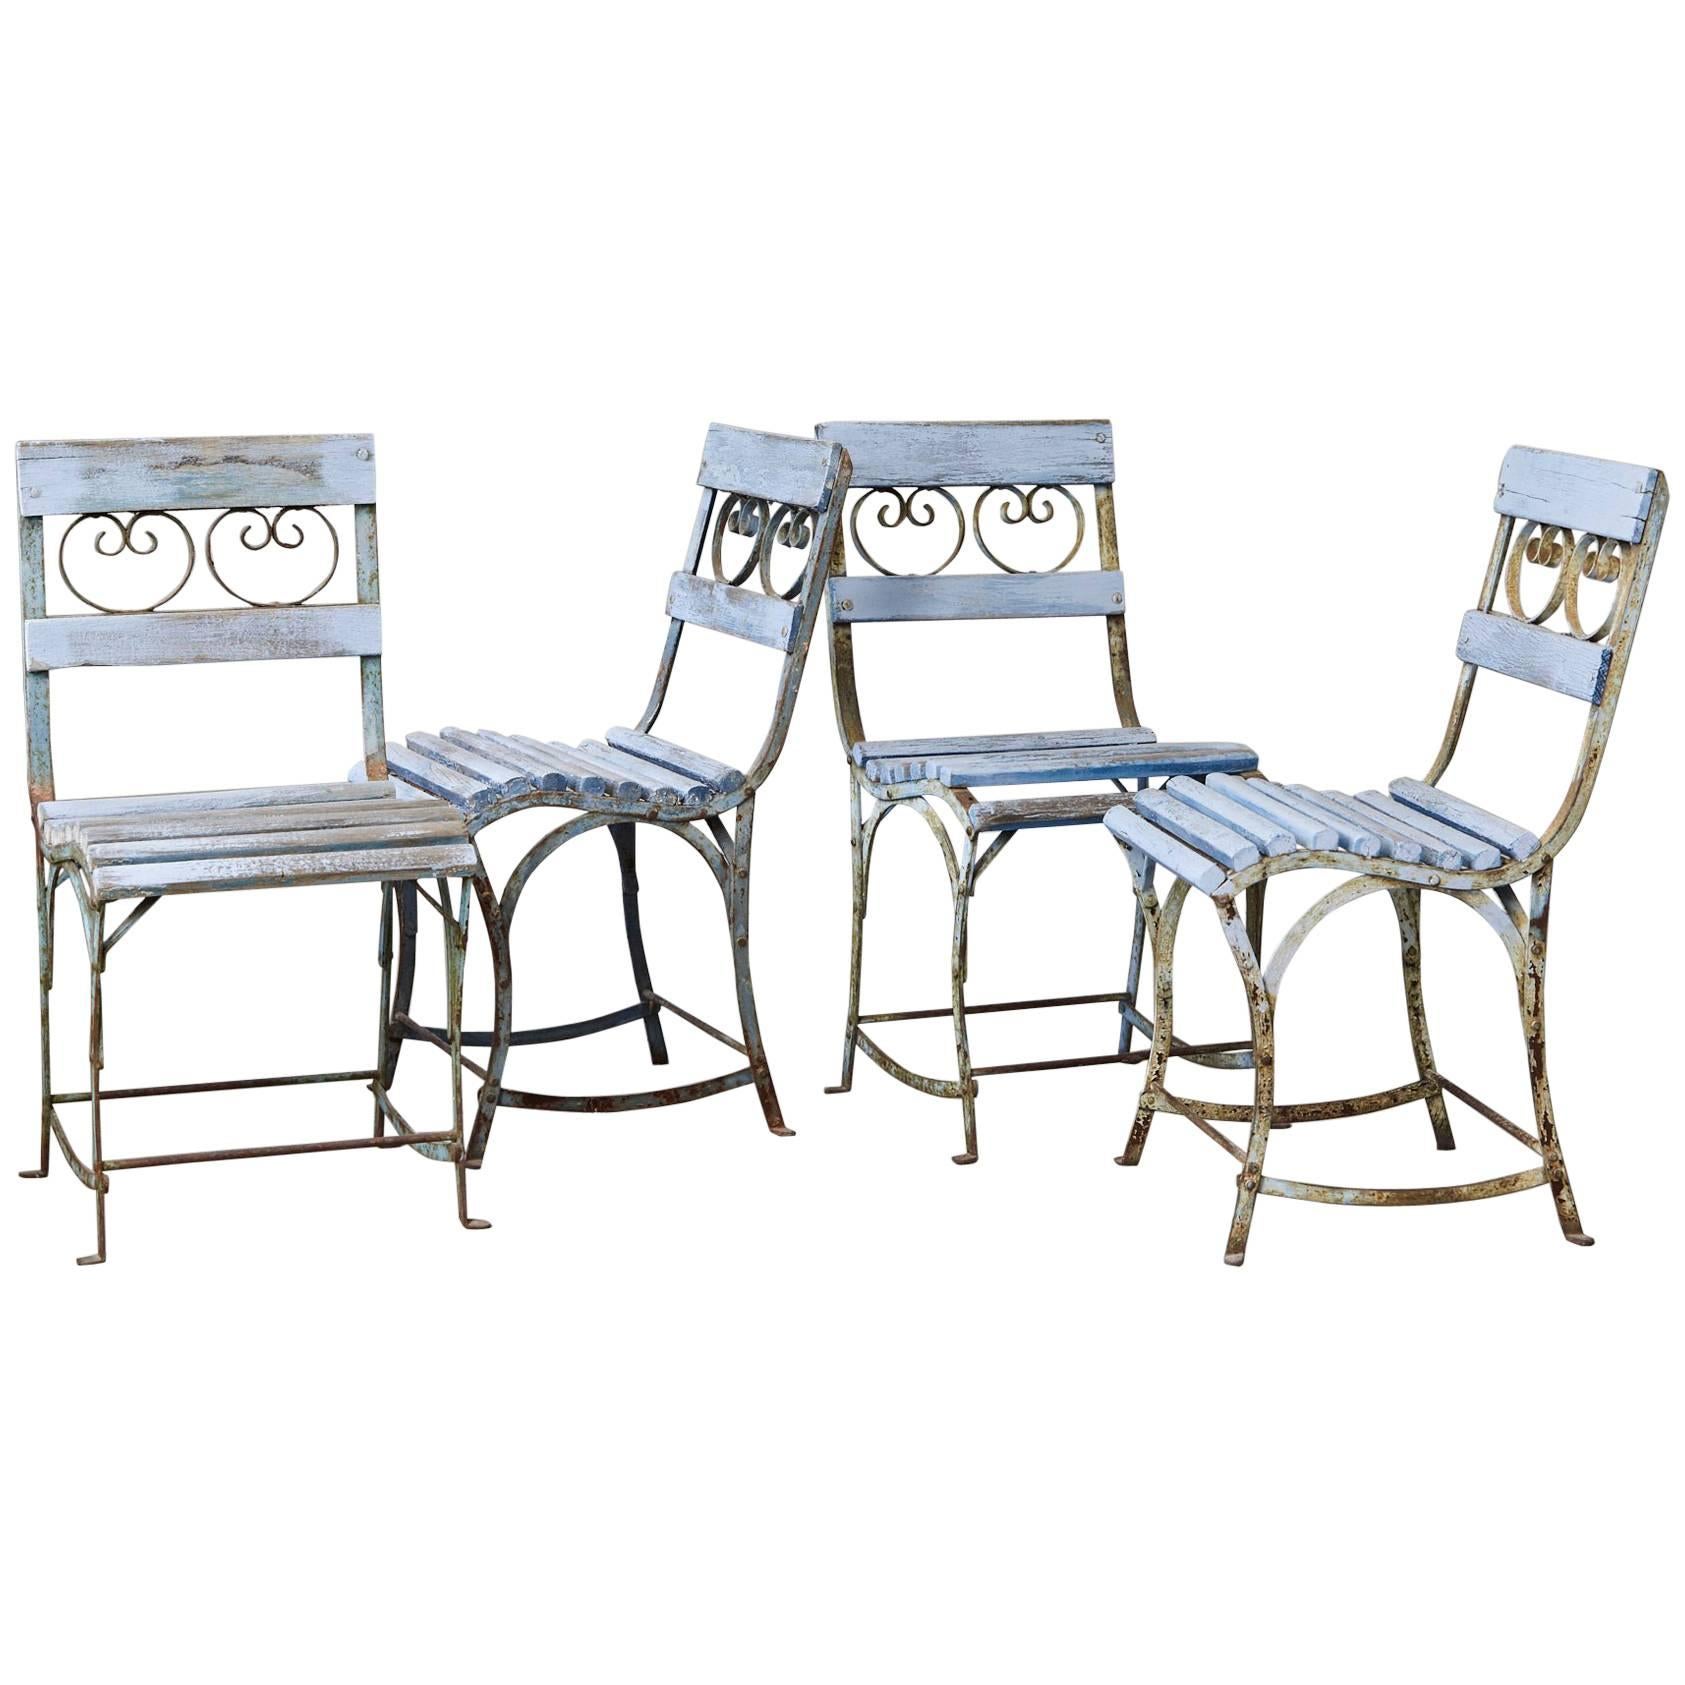 Set of Four French Wrought Iron Garden Chairs with Blue Wooden Slats